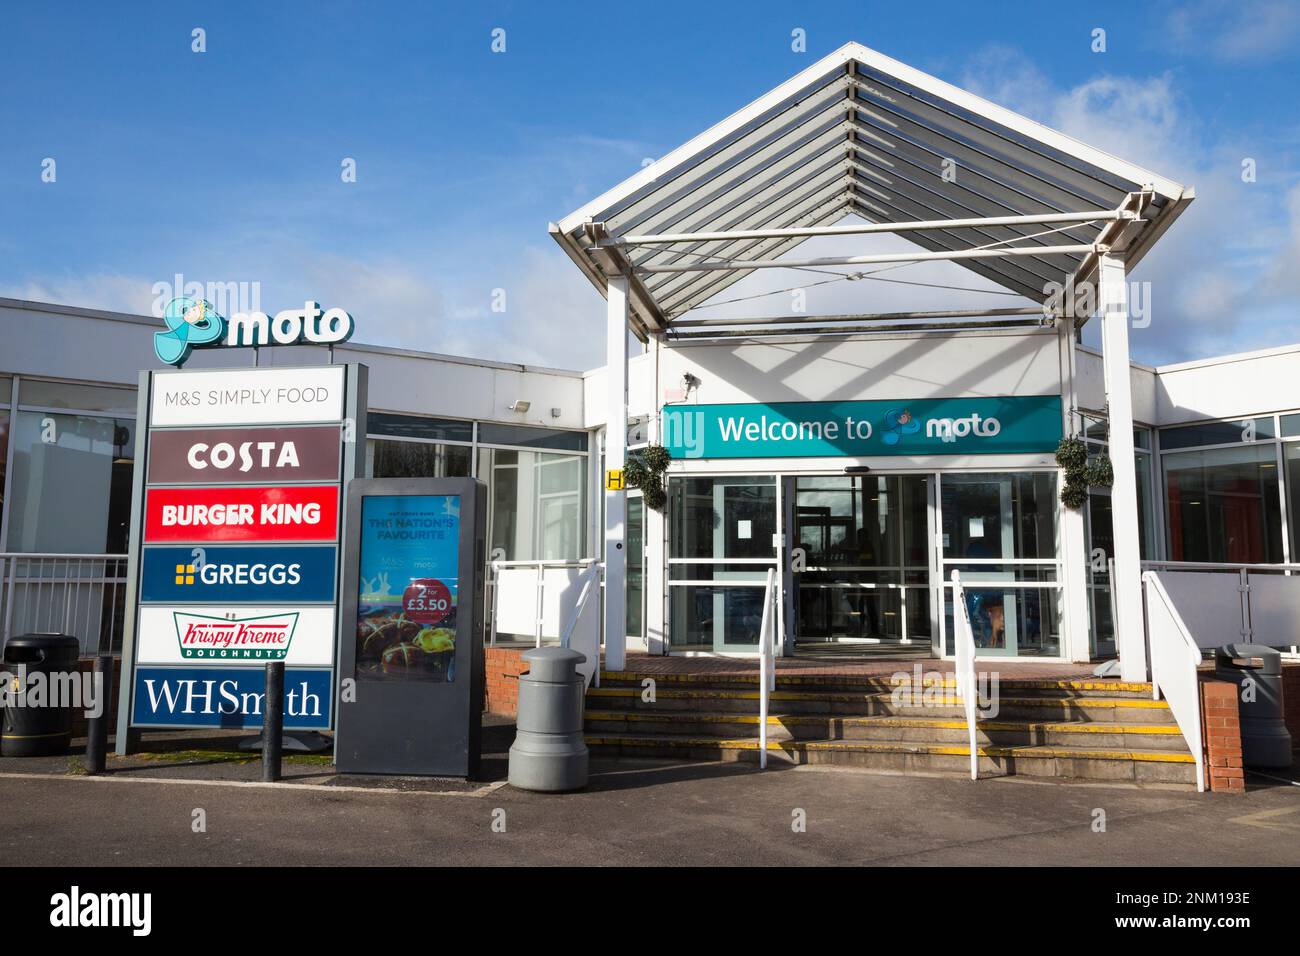 Frankley motorway Services, operated by MOTO, on the M5 motorway (near junction 3), North bound. UK. (133) Stock Photo